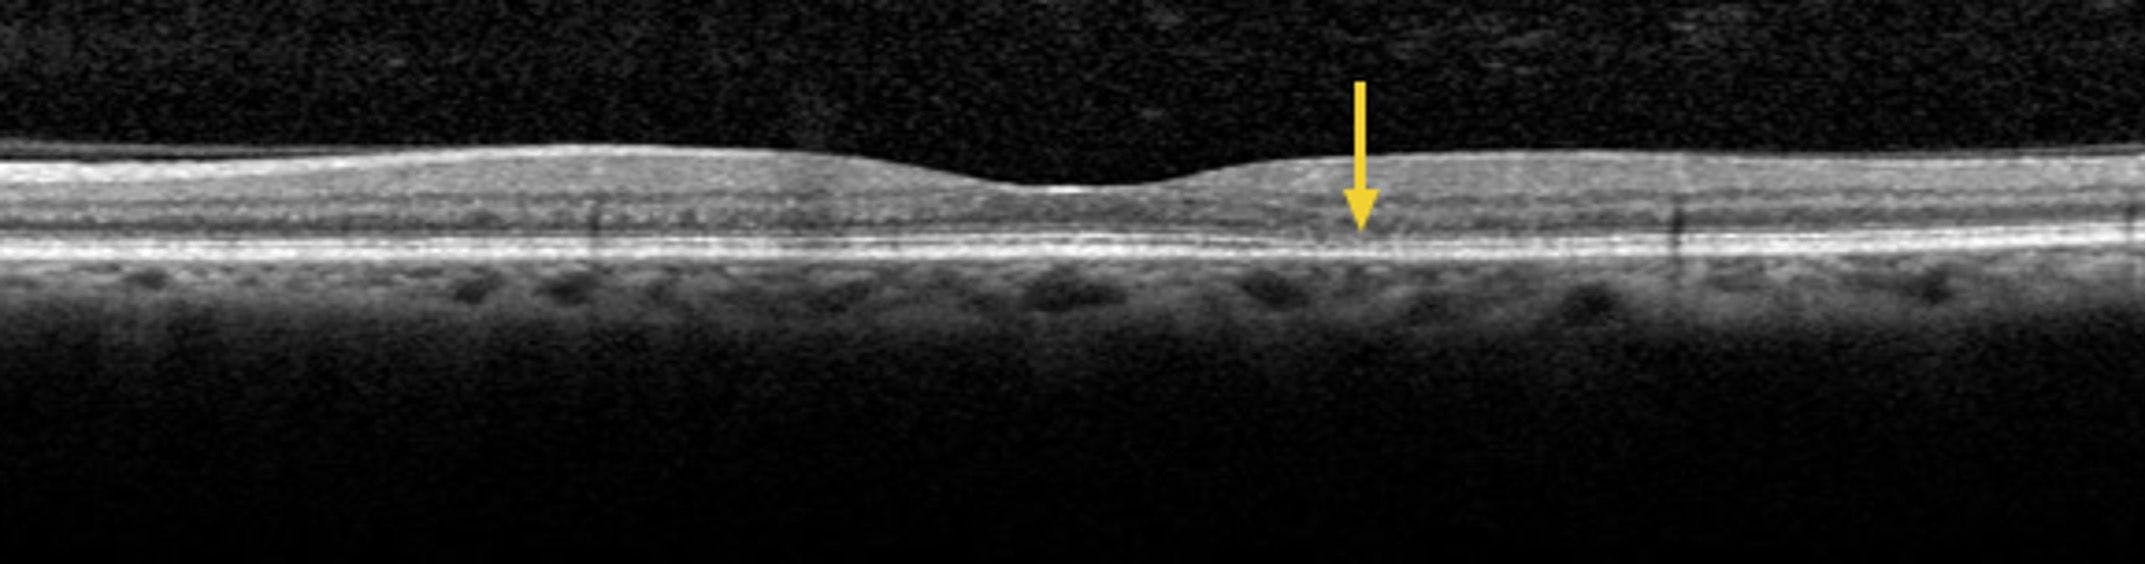 Figure 2. SD-OCT imaging of the left eye with the scan line adjusted to the area just below the fovea. Arrow points to a subtle area of attenuation of the ELM and IS/OS line.